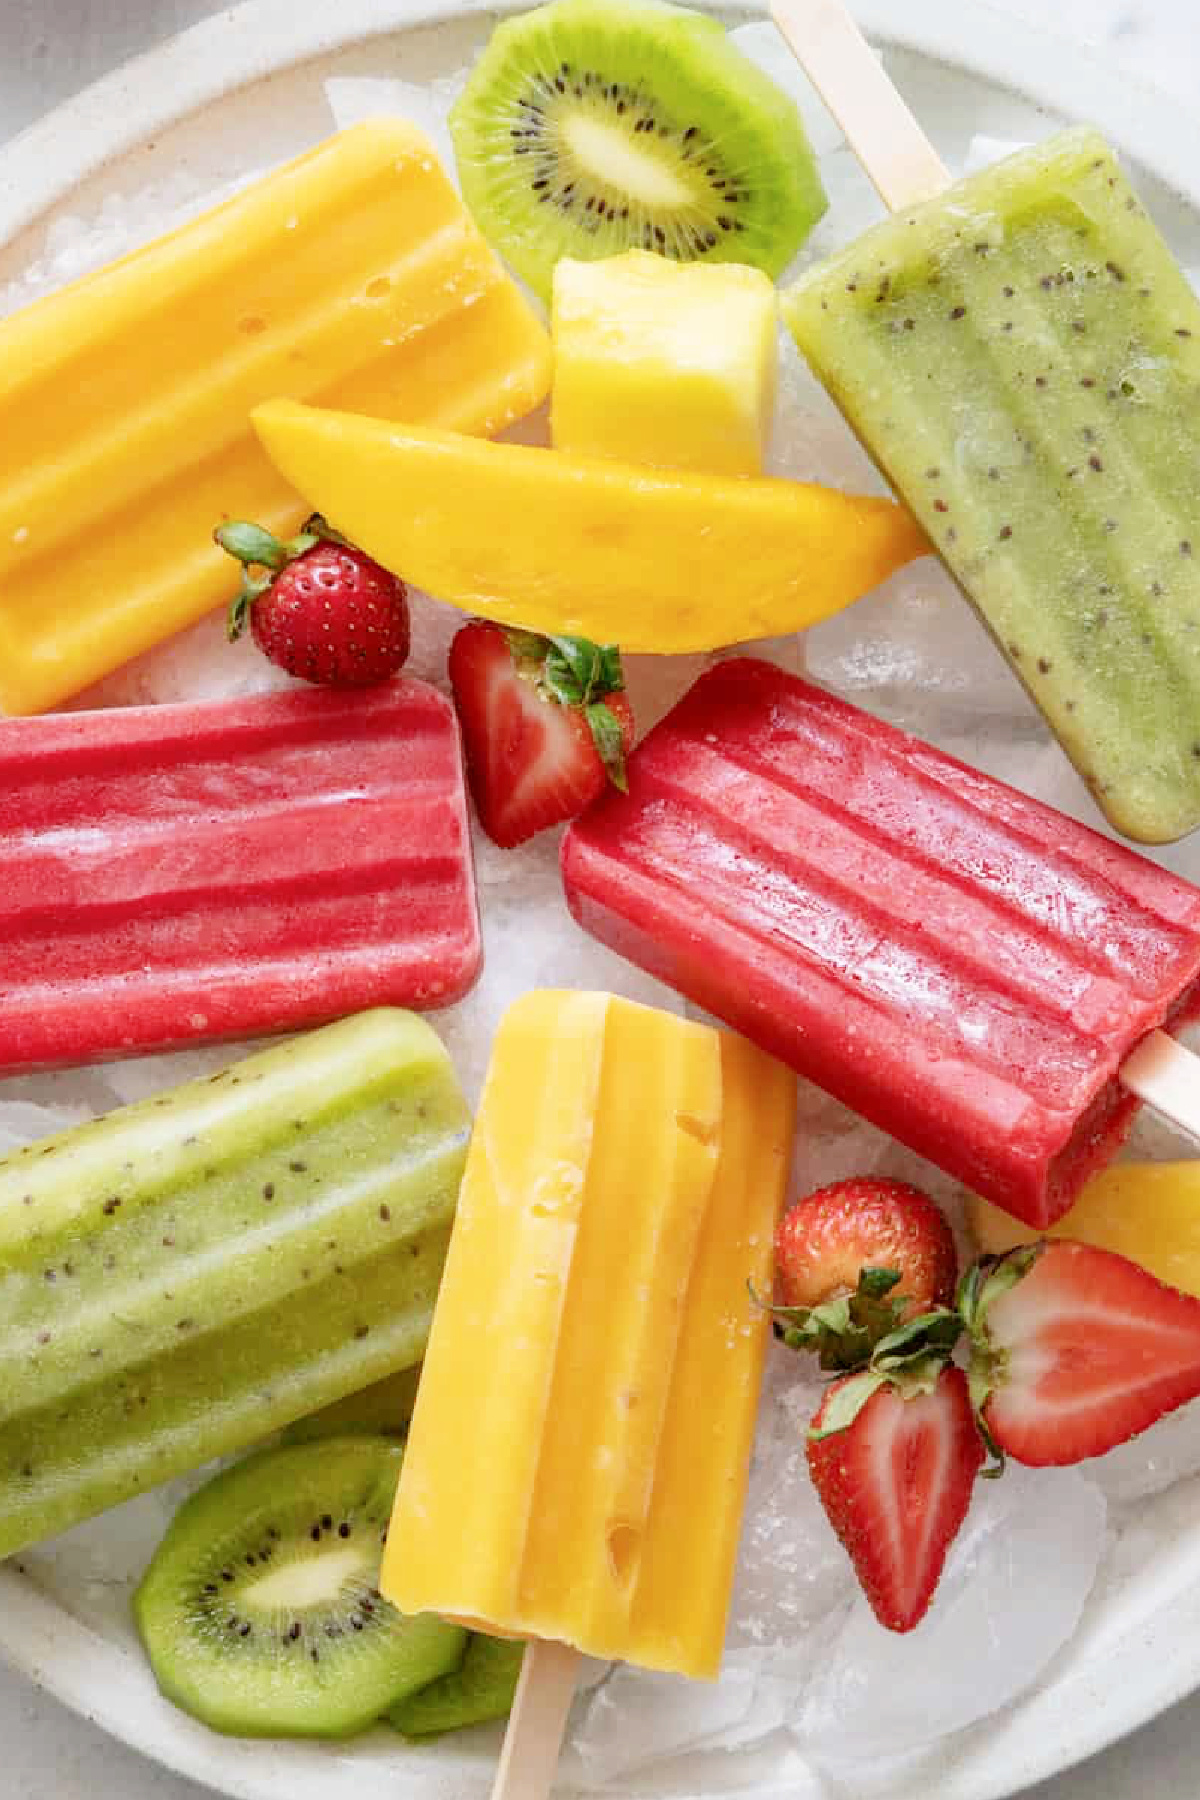 Cheap Party Food Ideas - Homemade Fruit Popsicles